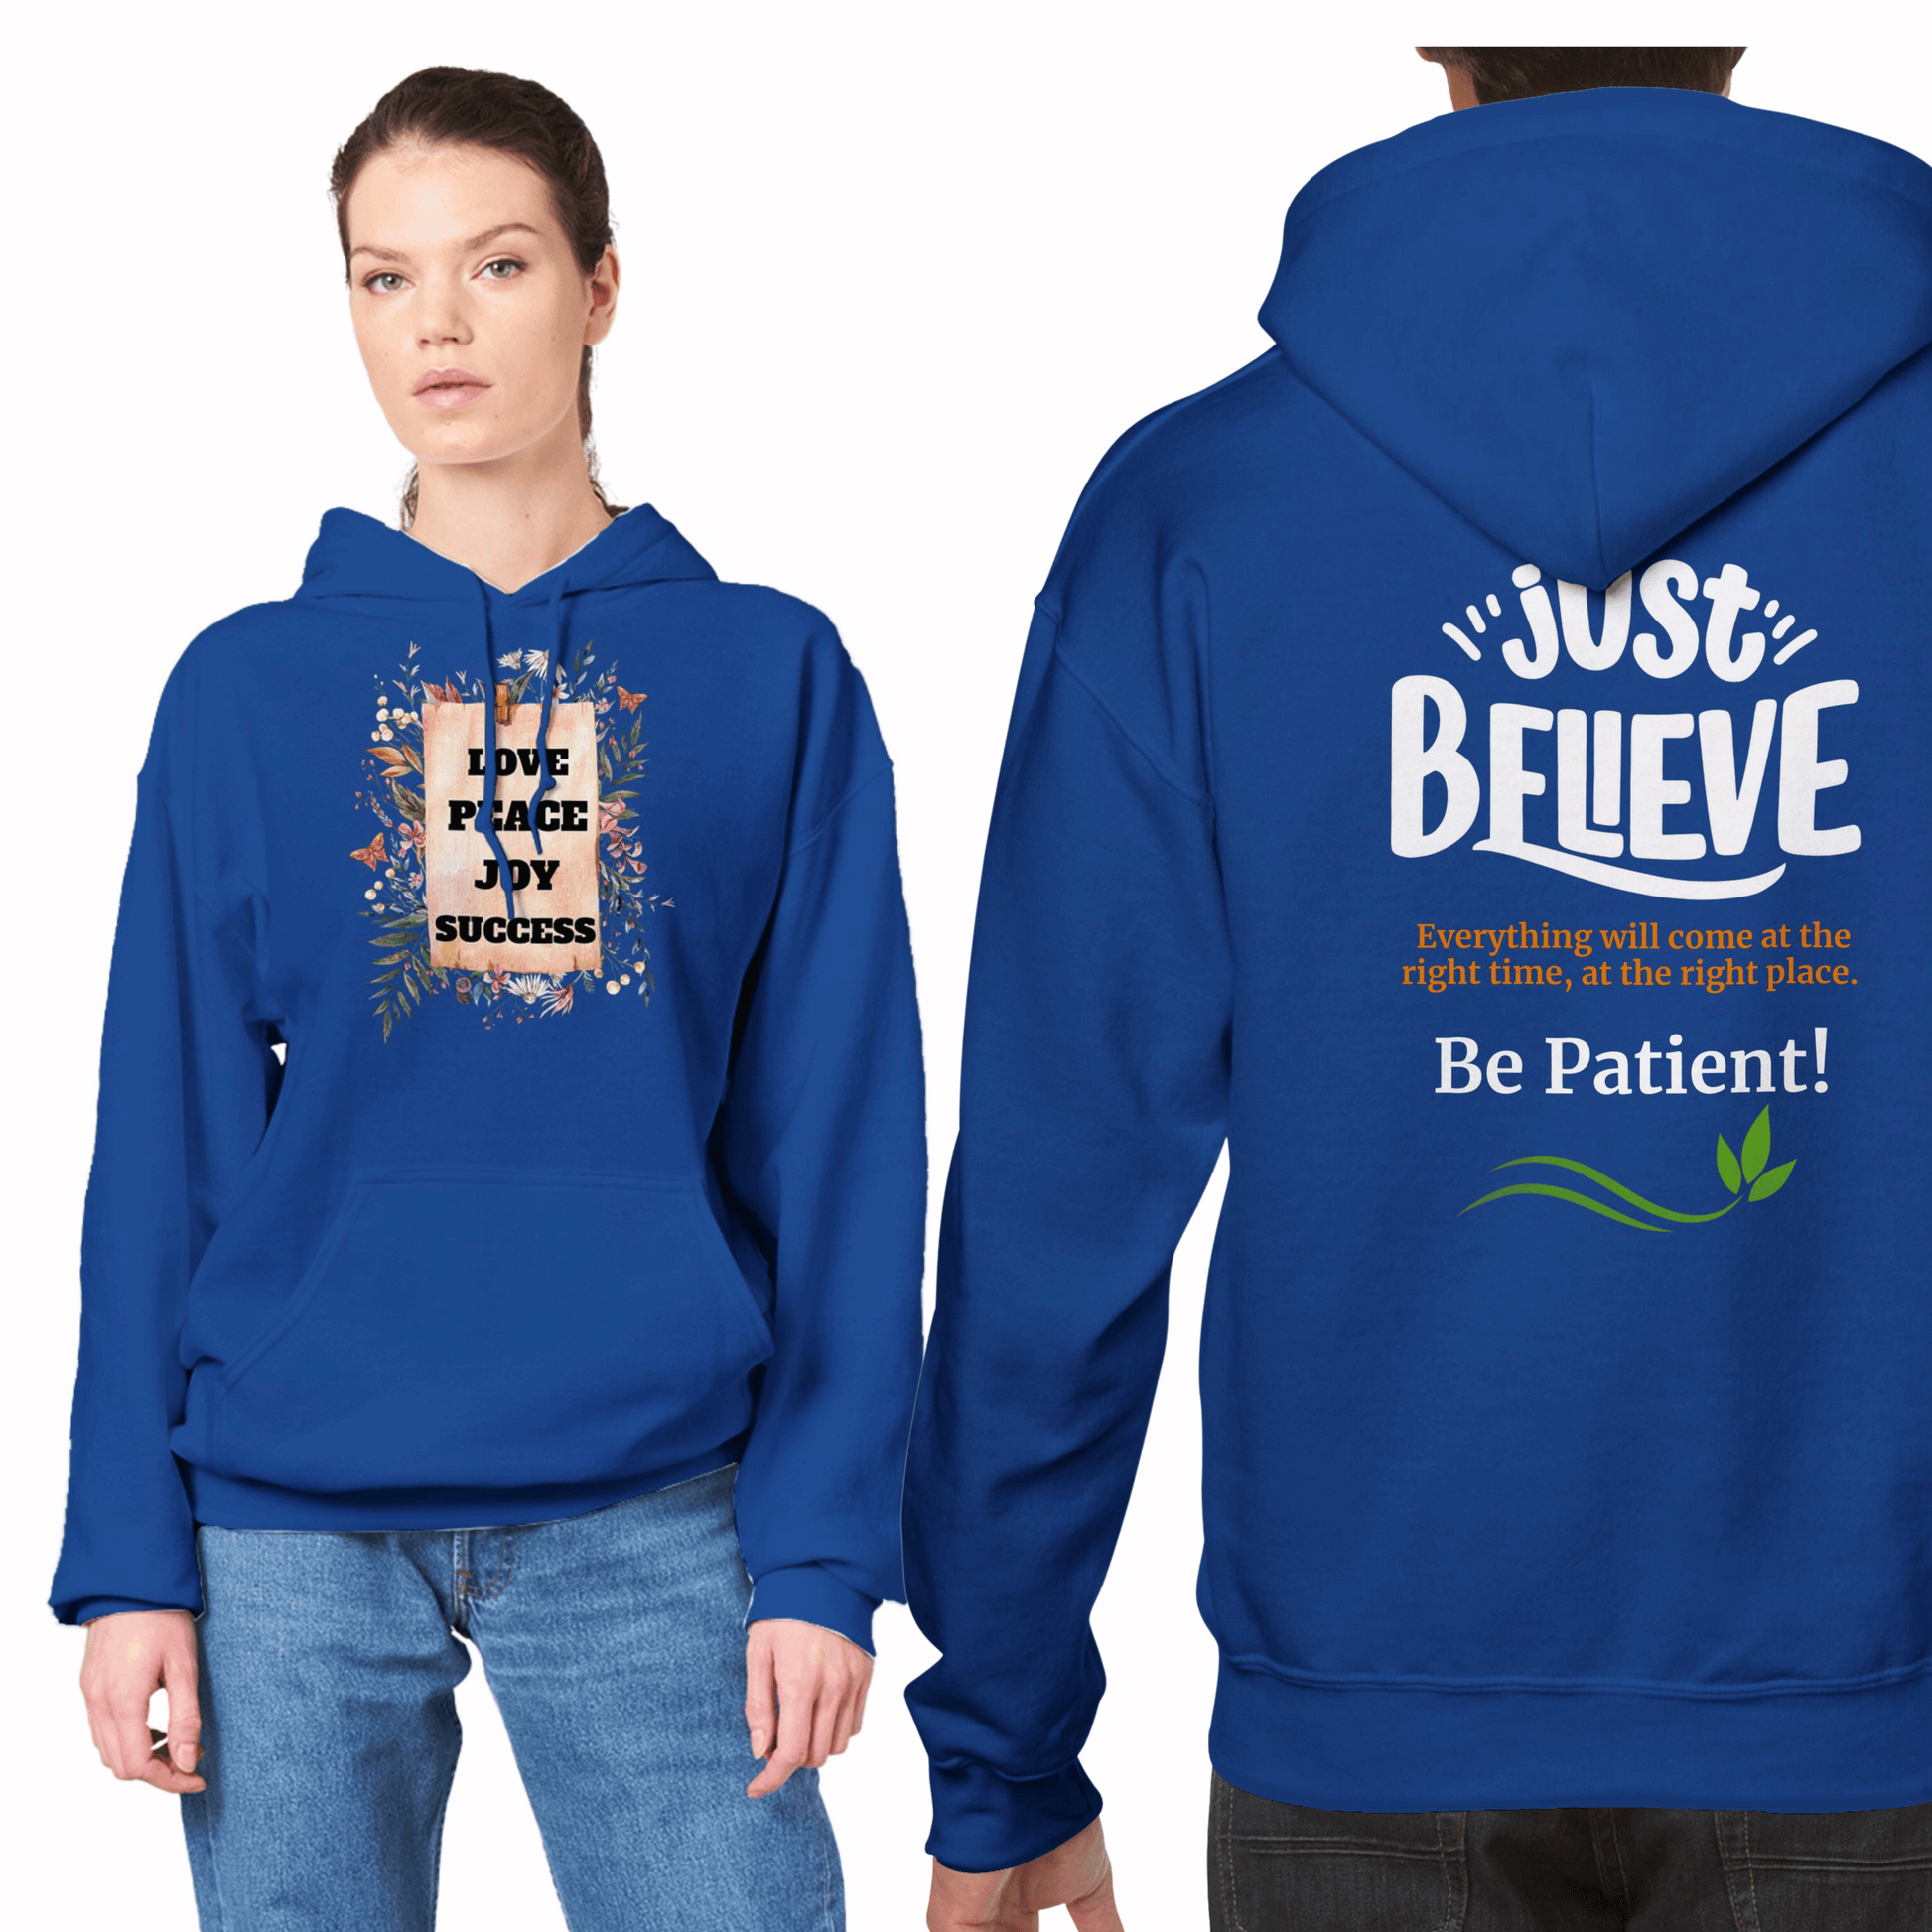 Cottagecore Unisex Hoddie, with positive Words: Love, Peace, Joy and Success. In the back: Just Believe everything will come at the right time and the right place. Be patient!Positive Quote Top, Vintage Jumper Gift Idea - dark blue hoodie